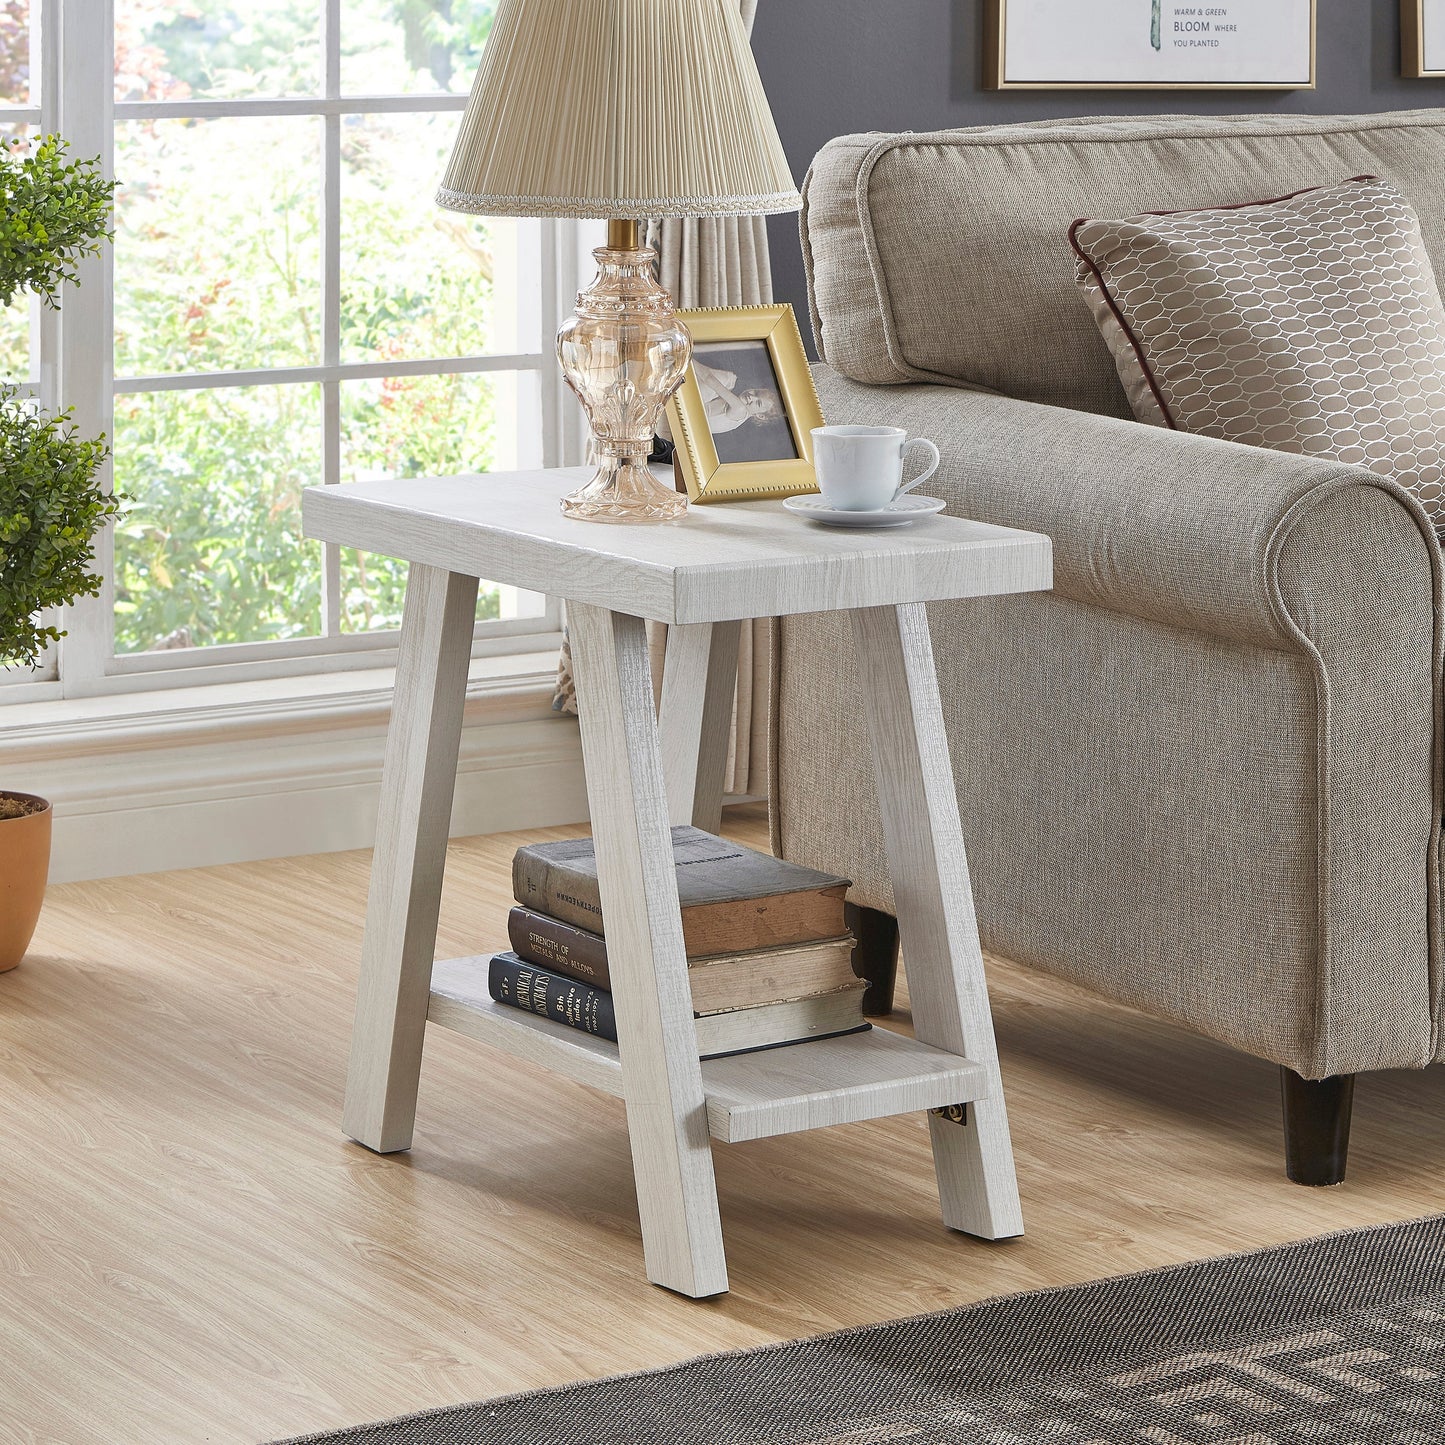 Athens Contemporary Wood Shelf Side Table in White Finish